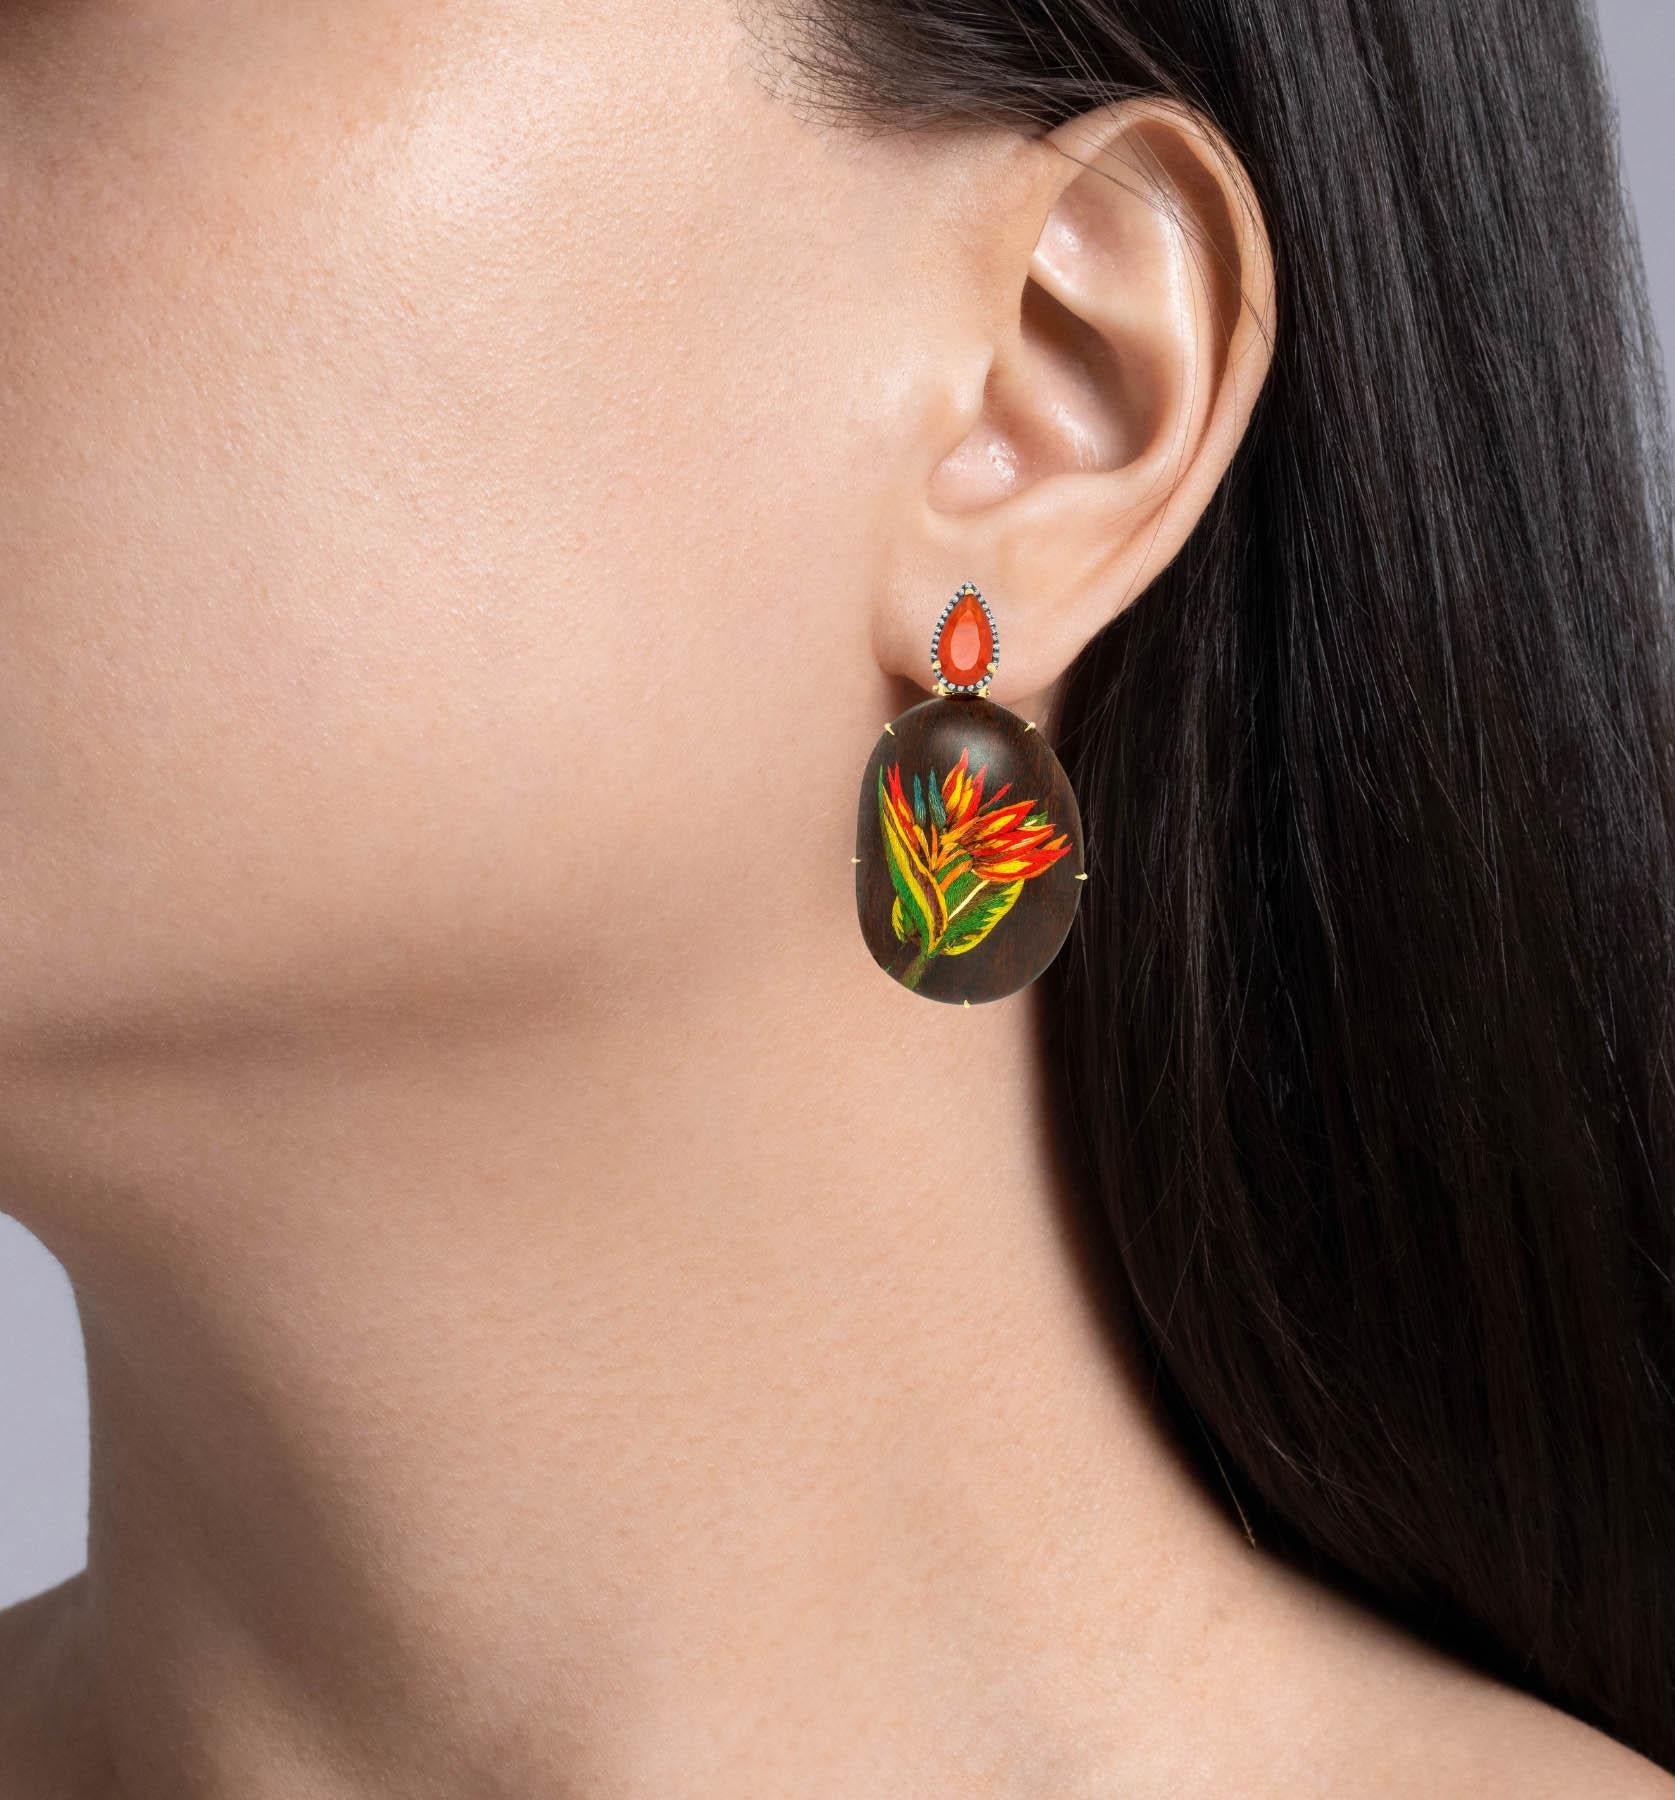 Silvia Furmanovich 18k Yellow Gold Fire Opal and Diamond Marquetry Wood Drop Earrings 
Set with 2 Pear shaped Fire Opals; estimated total weight is 4.06ctw 
The opals are surrounded with 0.27ctw of round diamonds.
Each earring is almost 2.5 inches